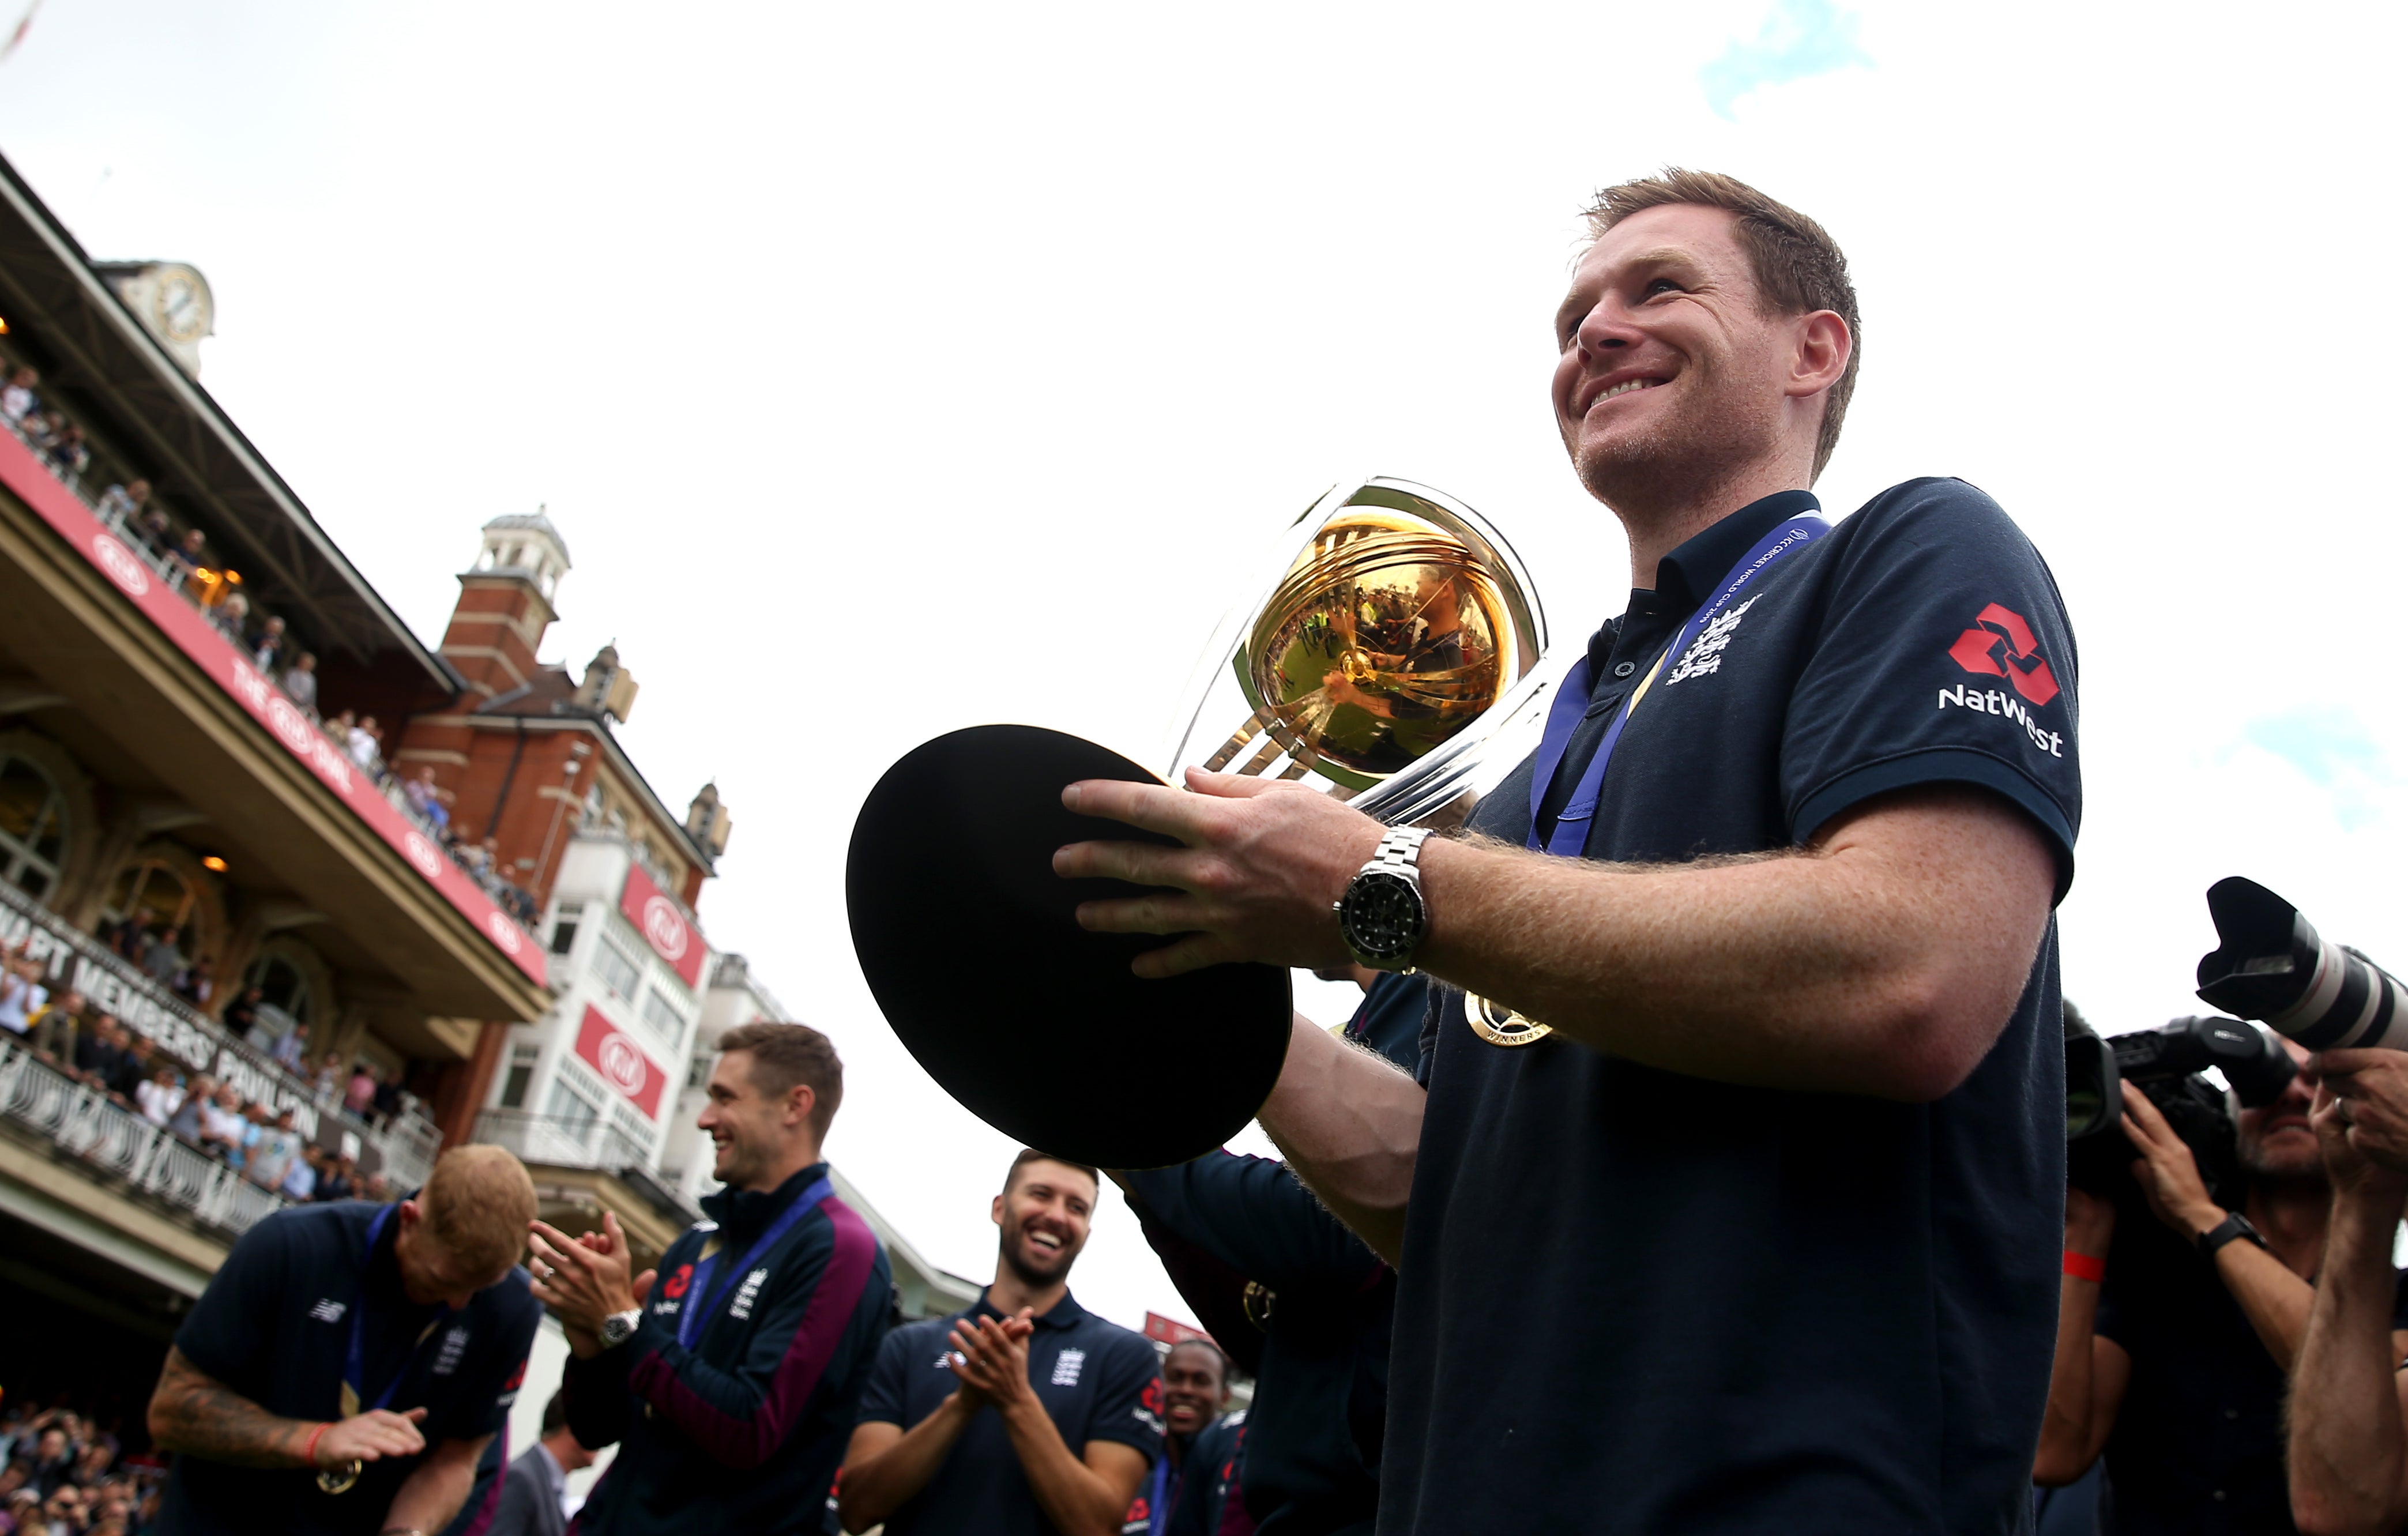 England’s Eoin Morgan with the World Cup trophy (Steven Paston/PA)